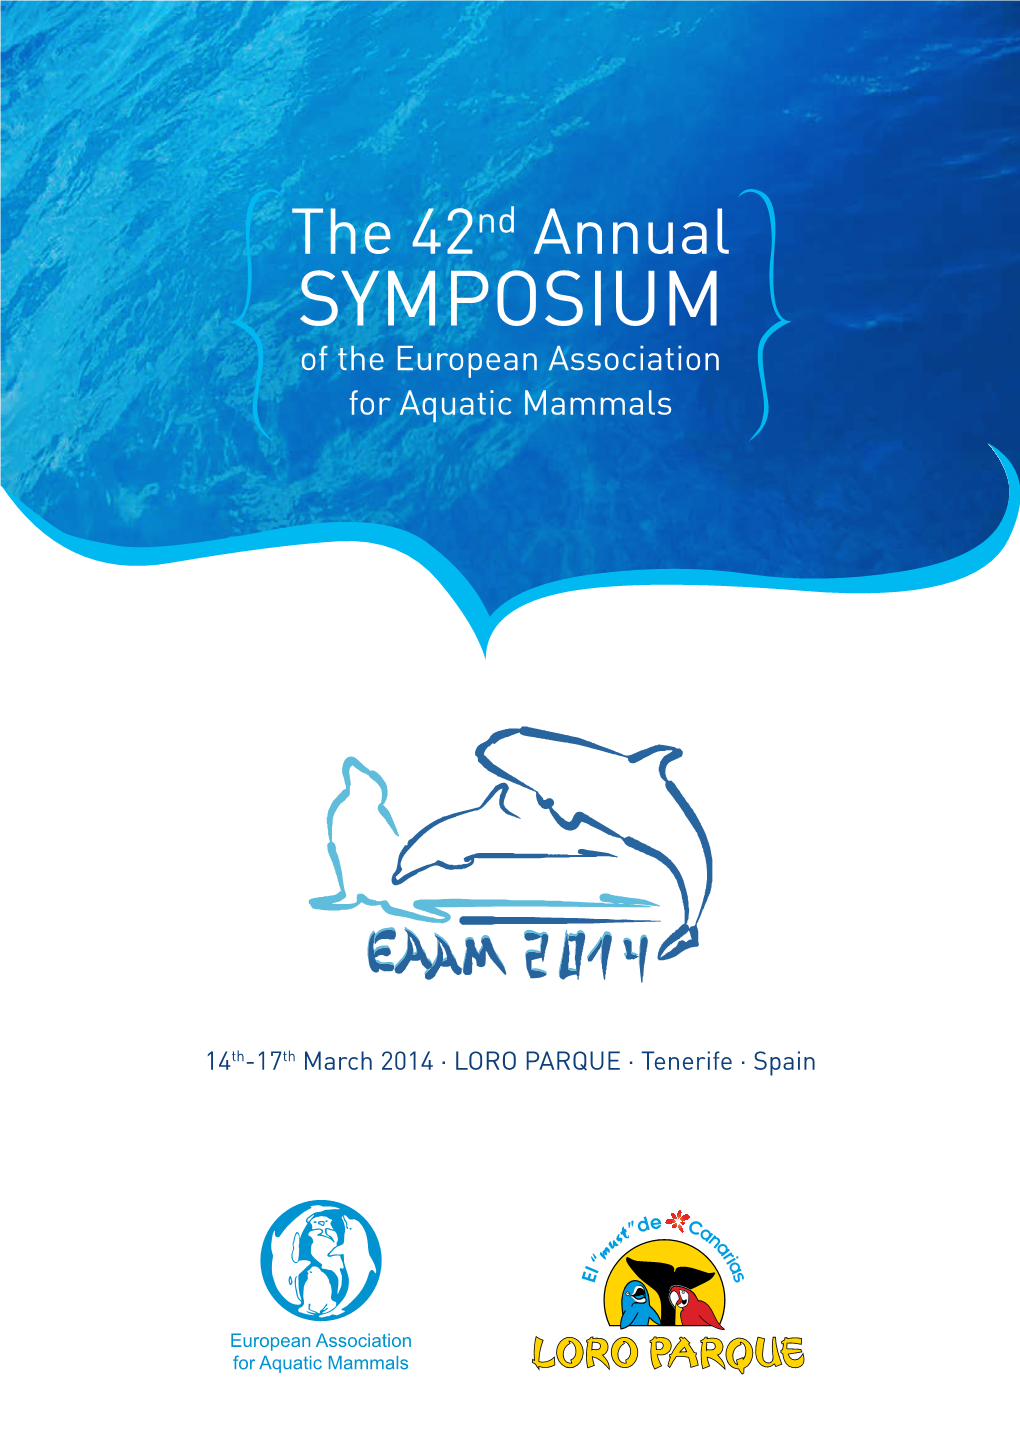 The 42Nd Annual Symposium of the European Association for Aquatic Mammals